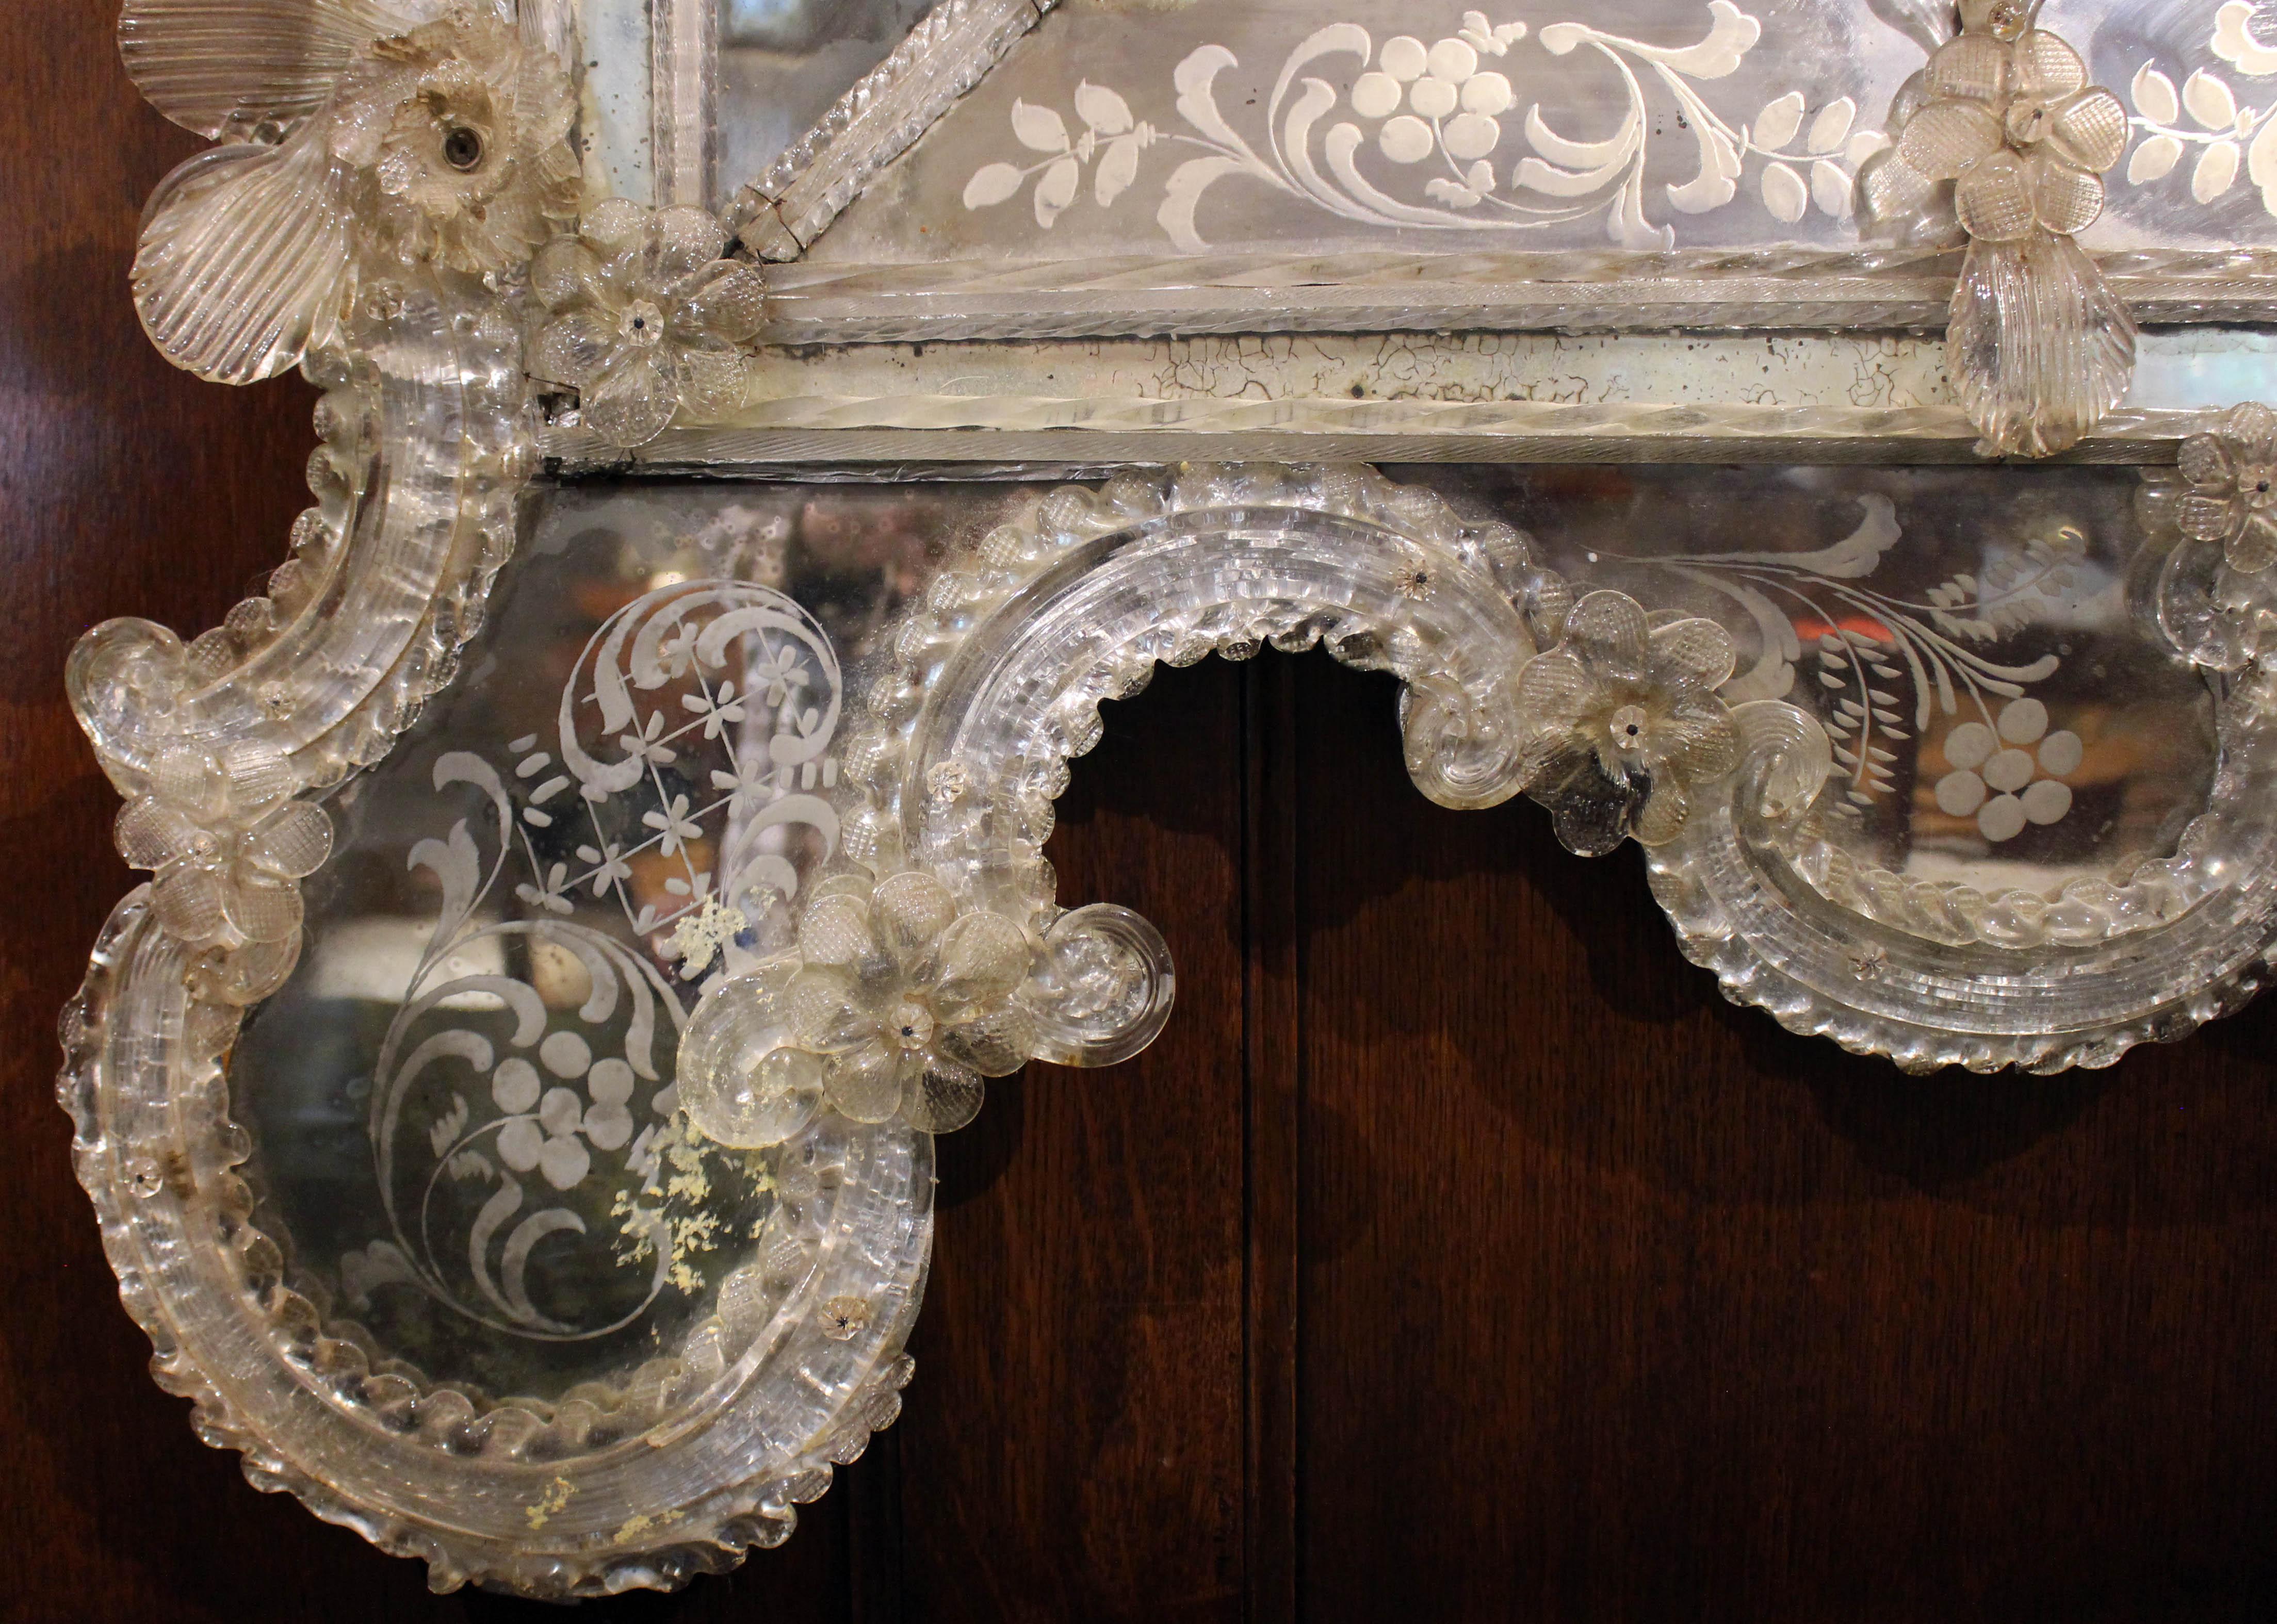 An important Venetian mirror, Baroque-Rococo transitional revival. The basic rectangular form with corner panels is Baroque, while the asymmetrical crest displays Rococo at its best. Mirror paneled in etched & engraved mirrors festooned with blown